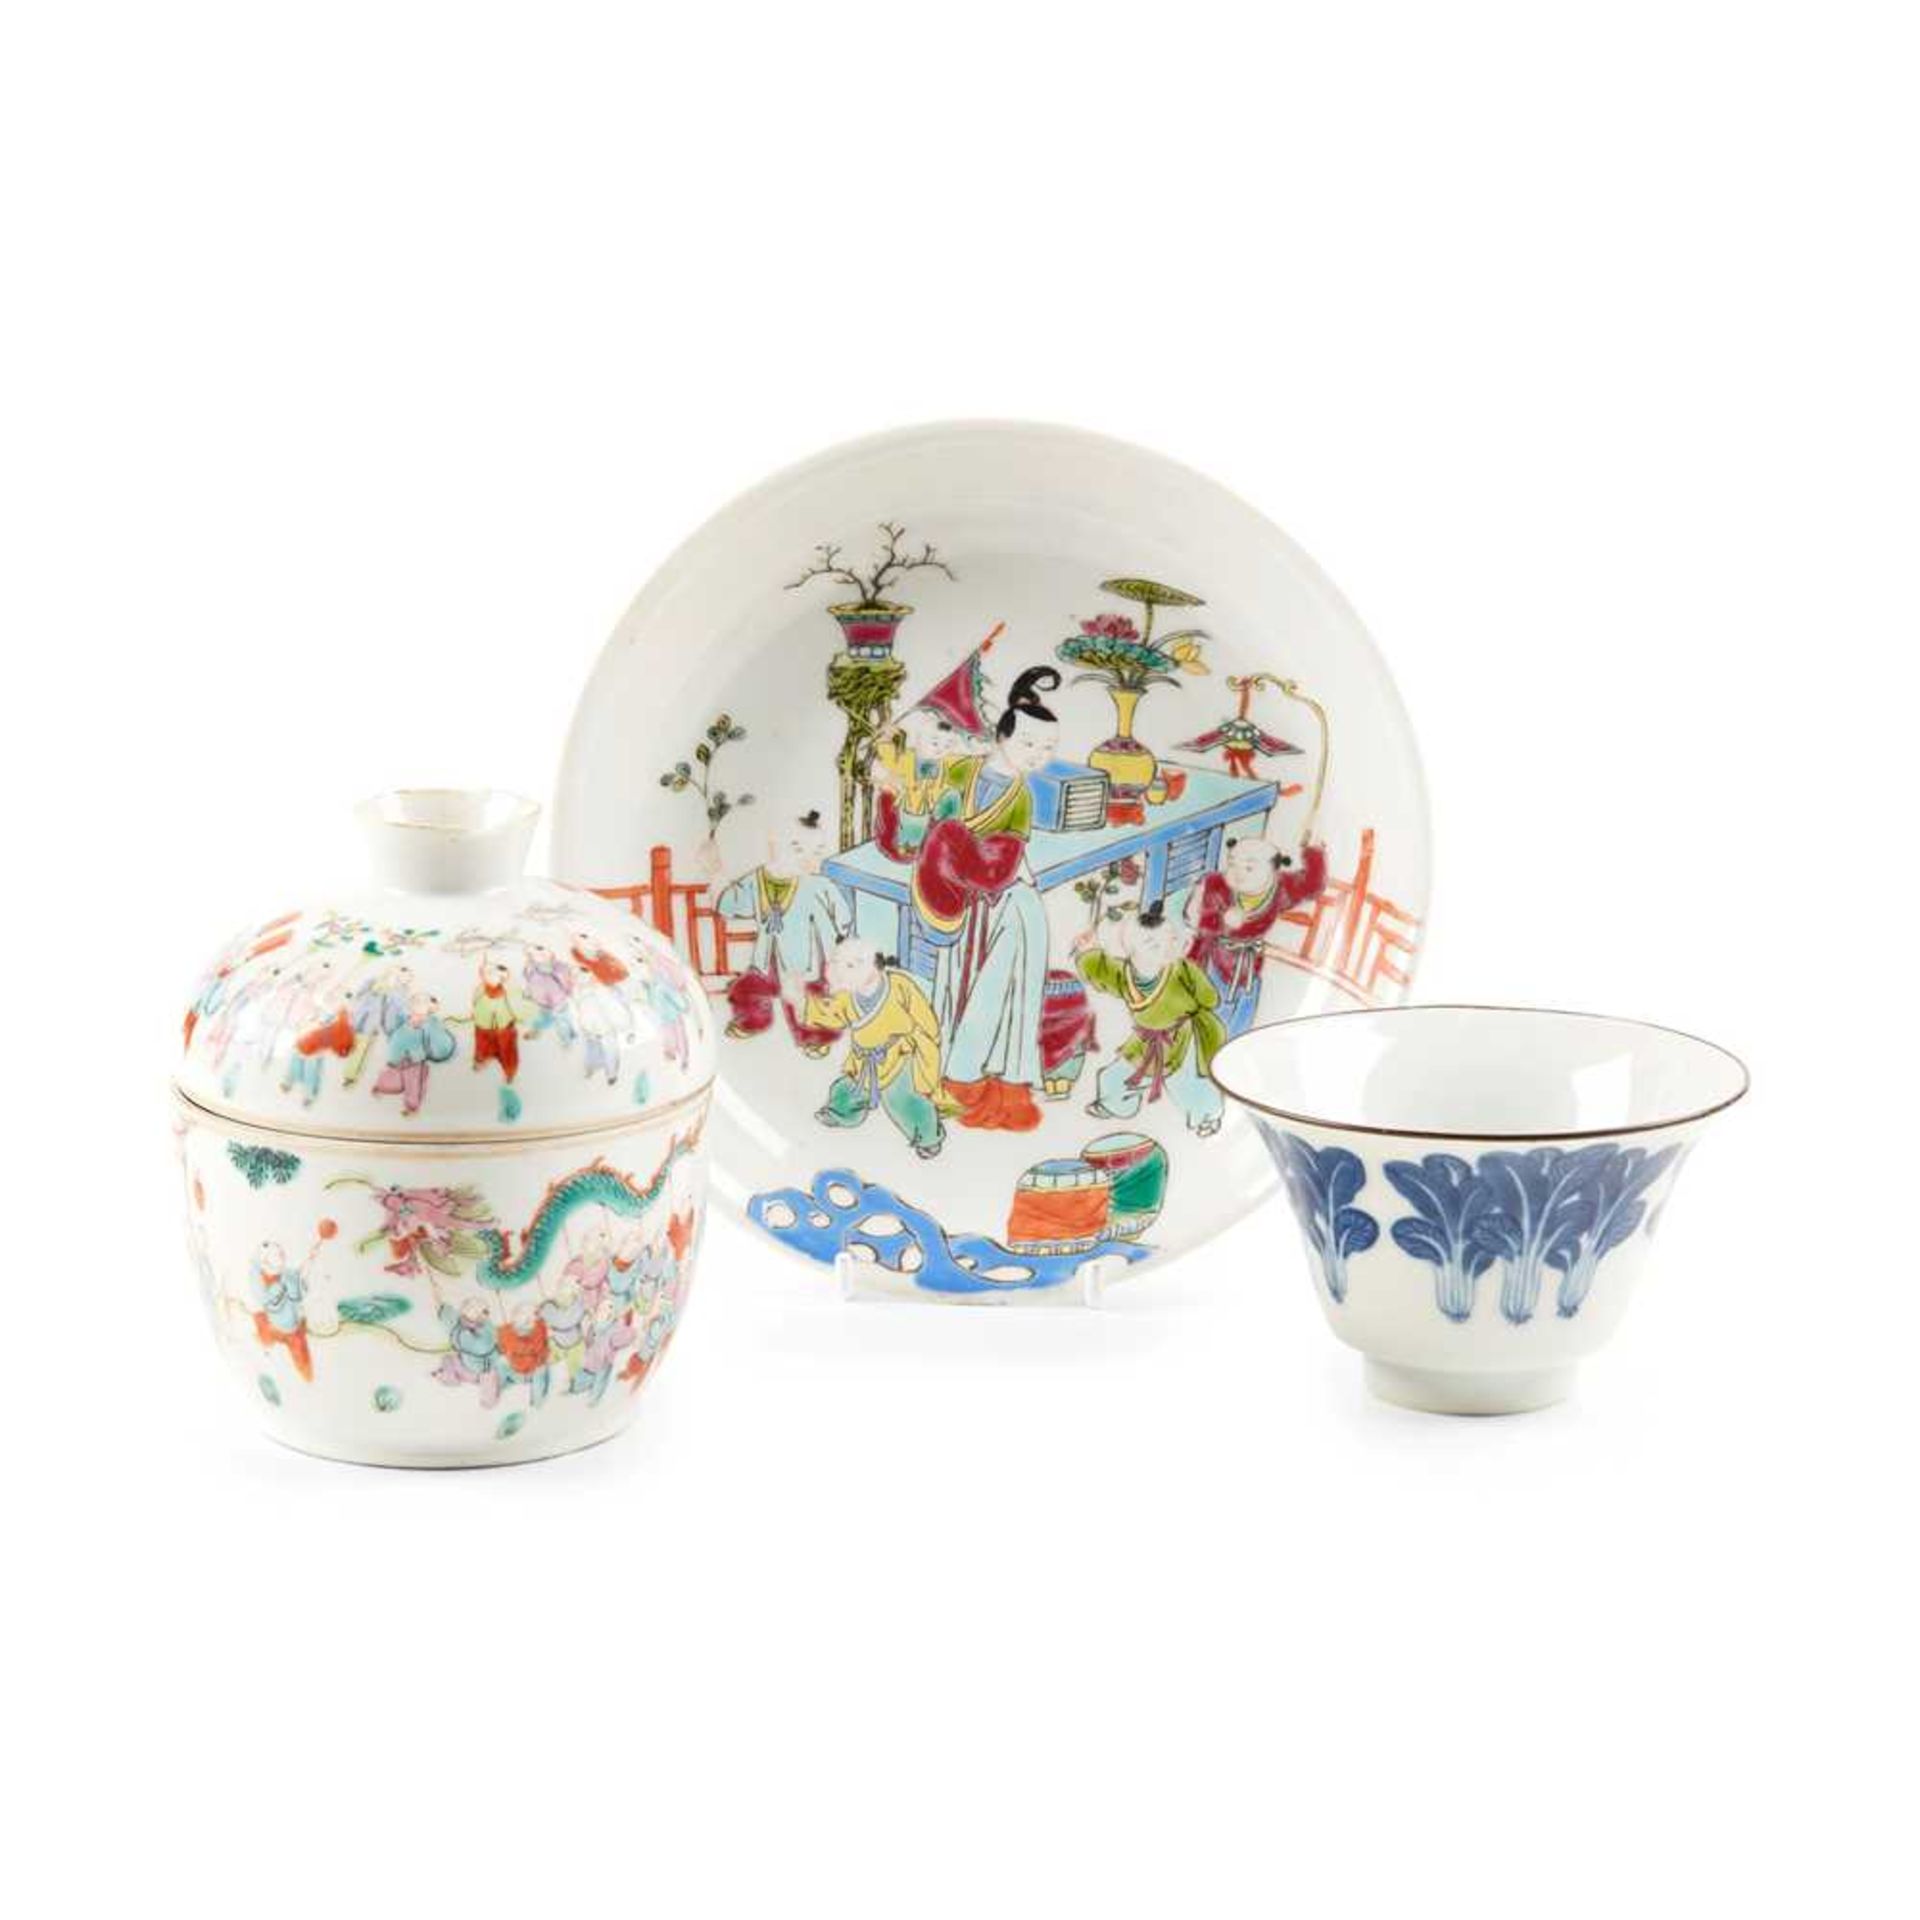 COLLECTION OF THREE PORCELAIN WARES LATE QING DYNASTY-REPUBLIC PERIOD, 19TH-20TH CENTURY